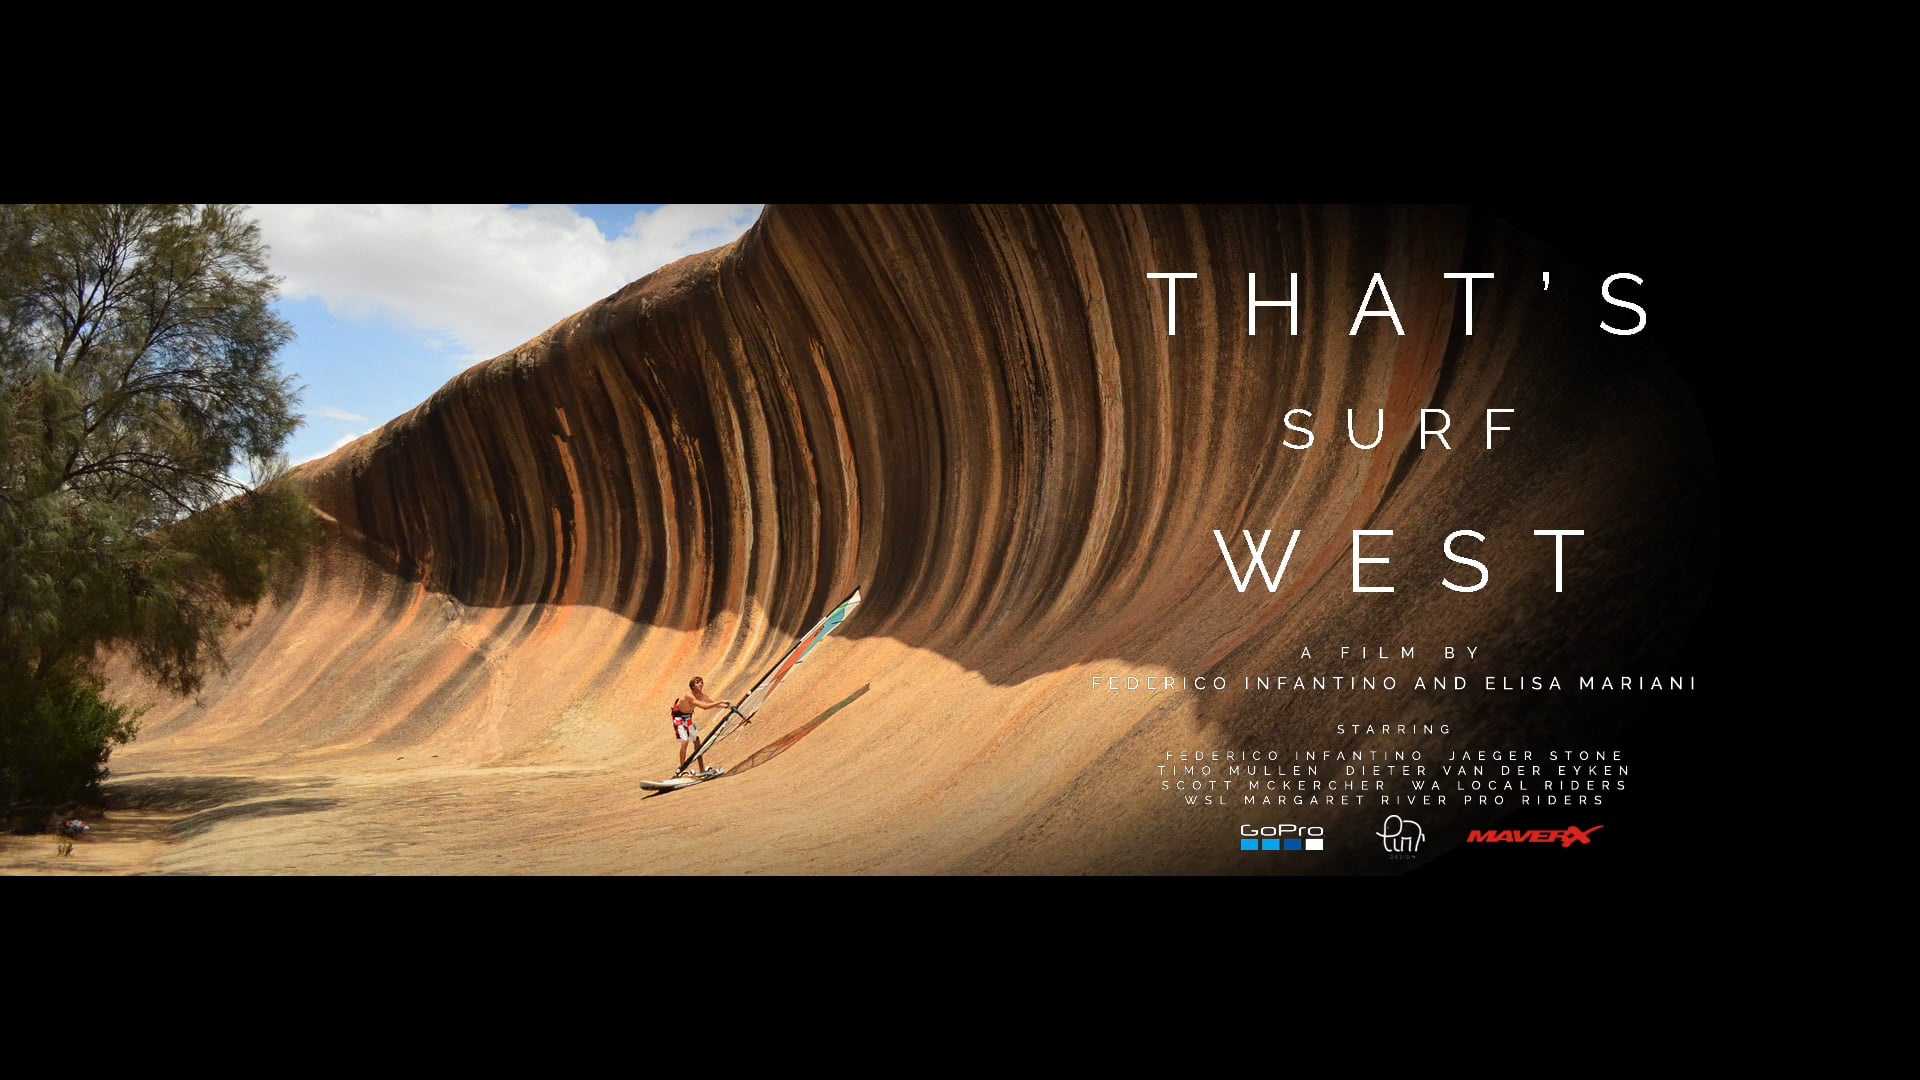 Thats Surf West - The Movie